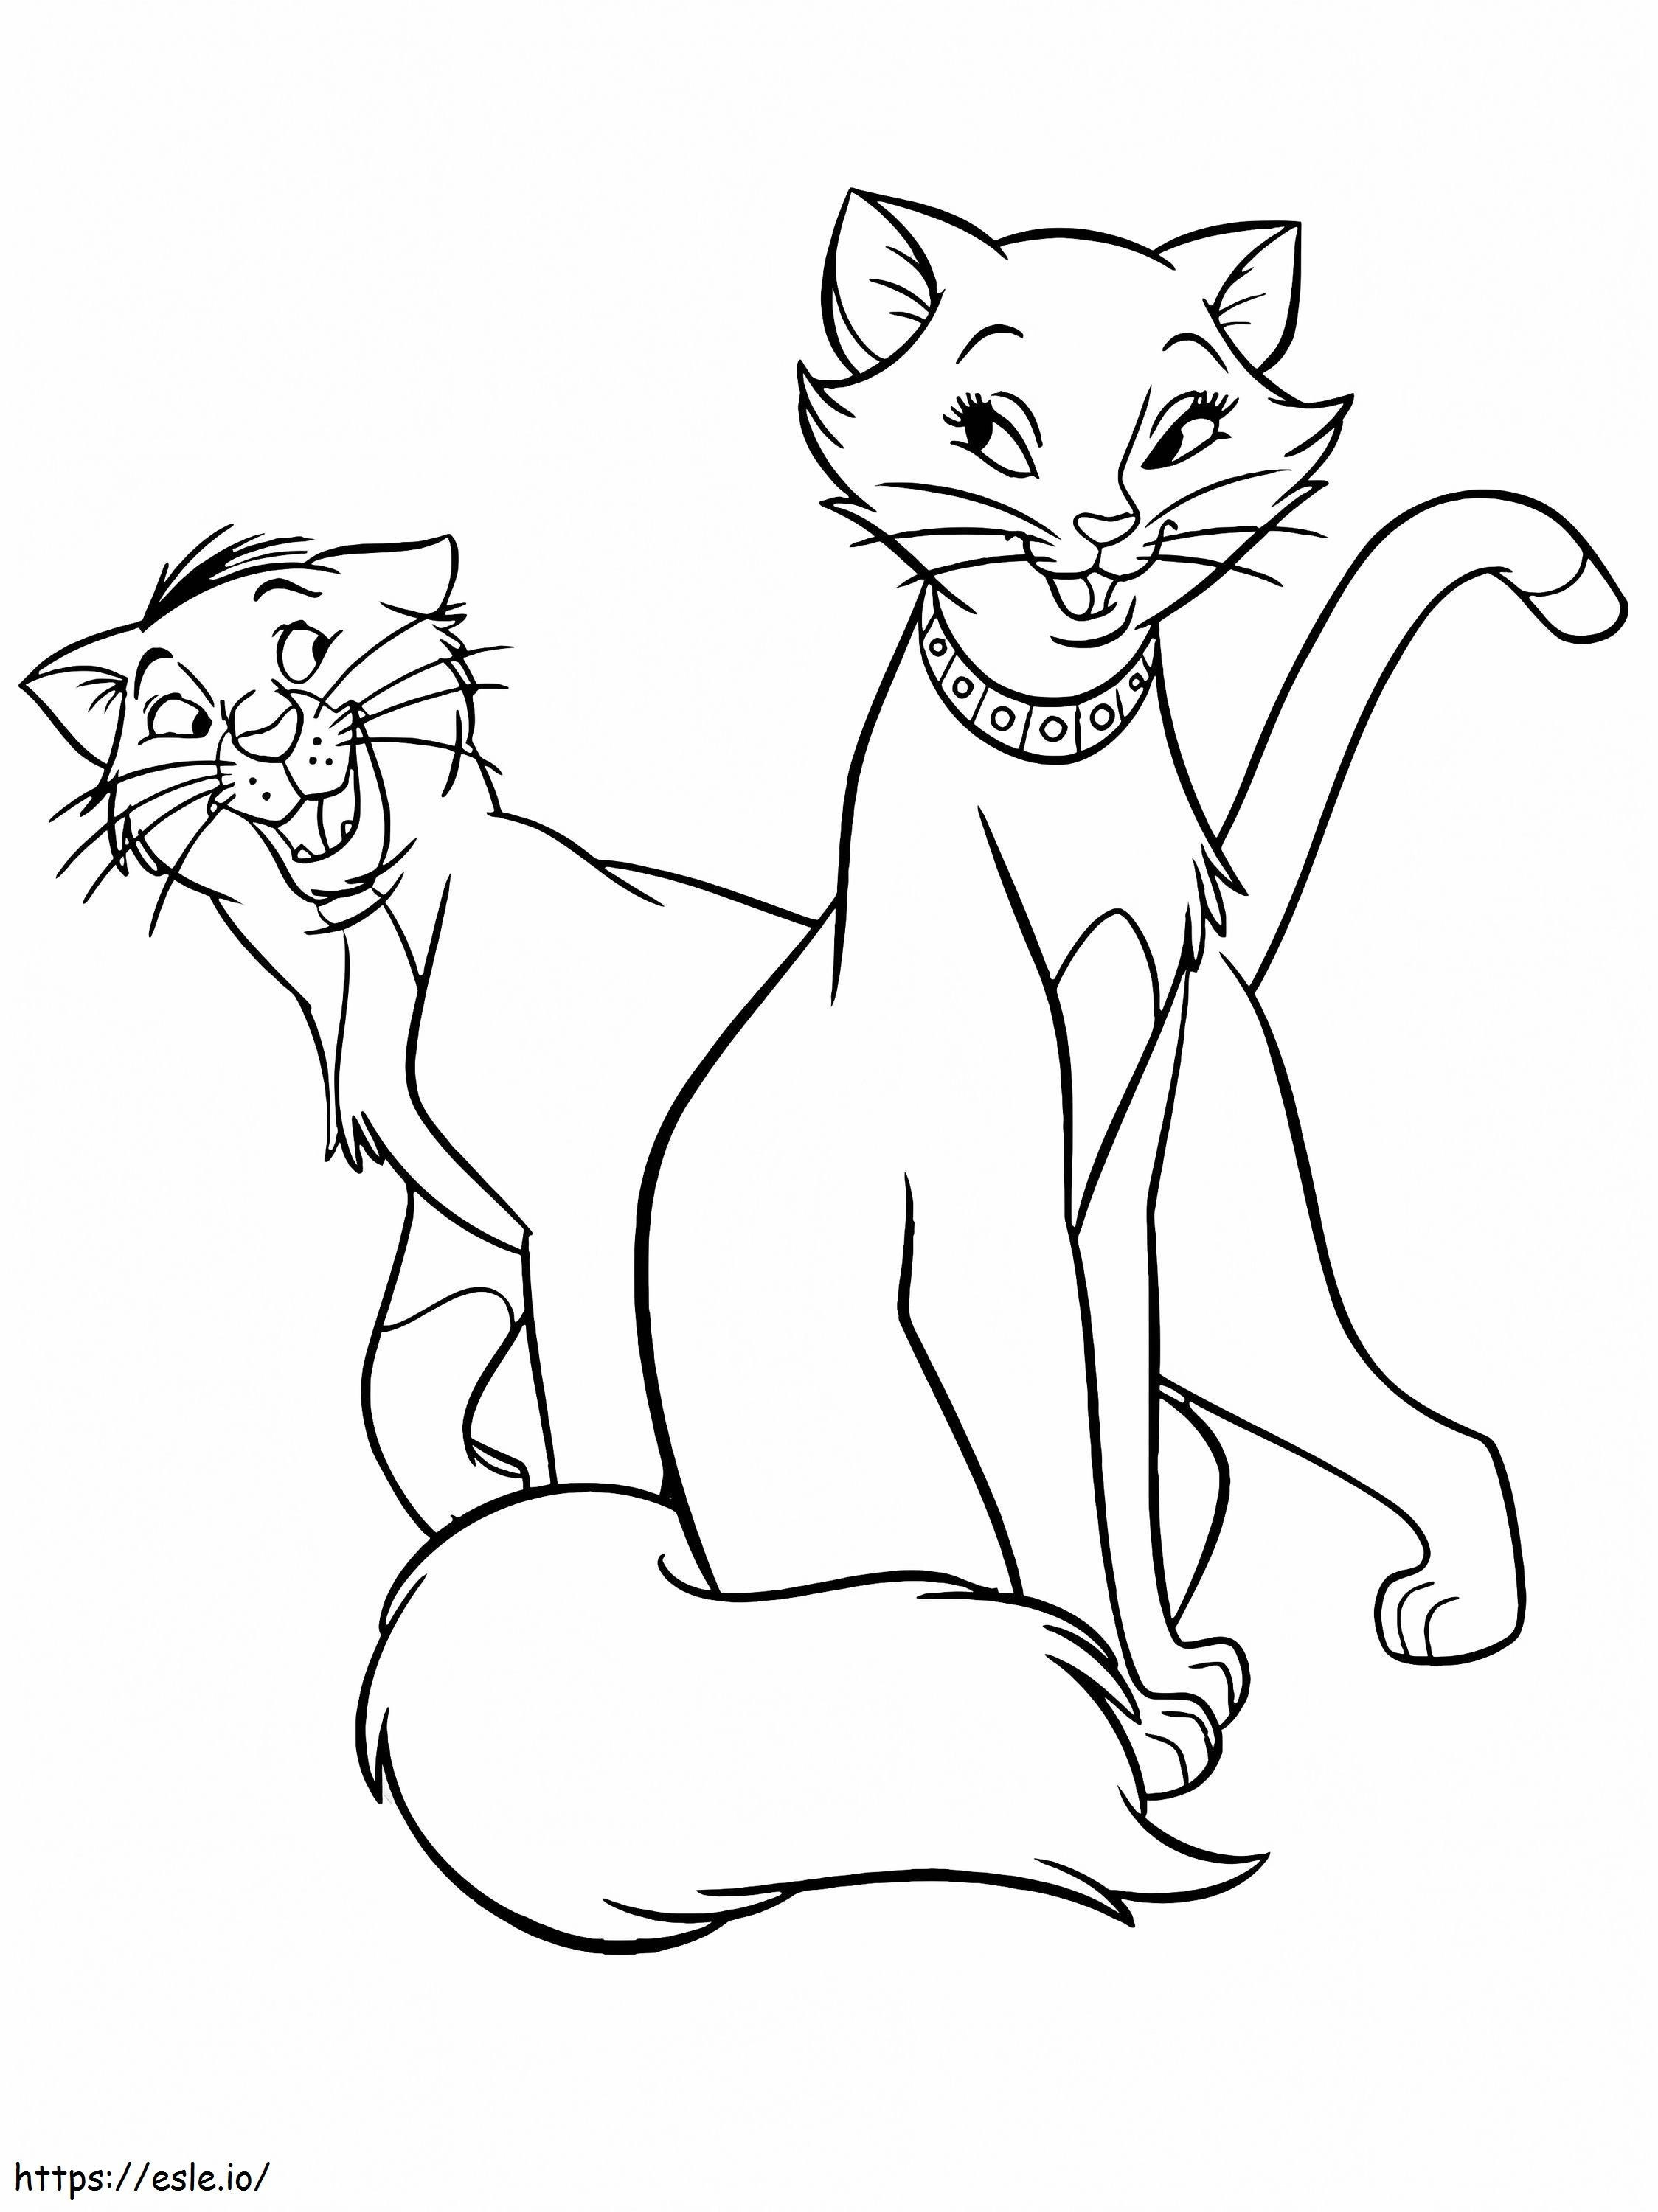 1599178671 Aristcolor2 coloring page